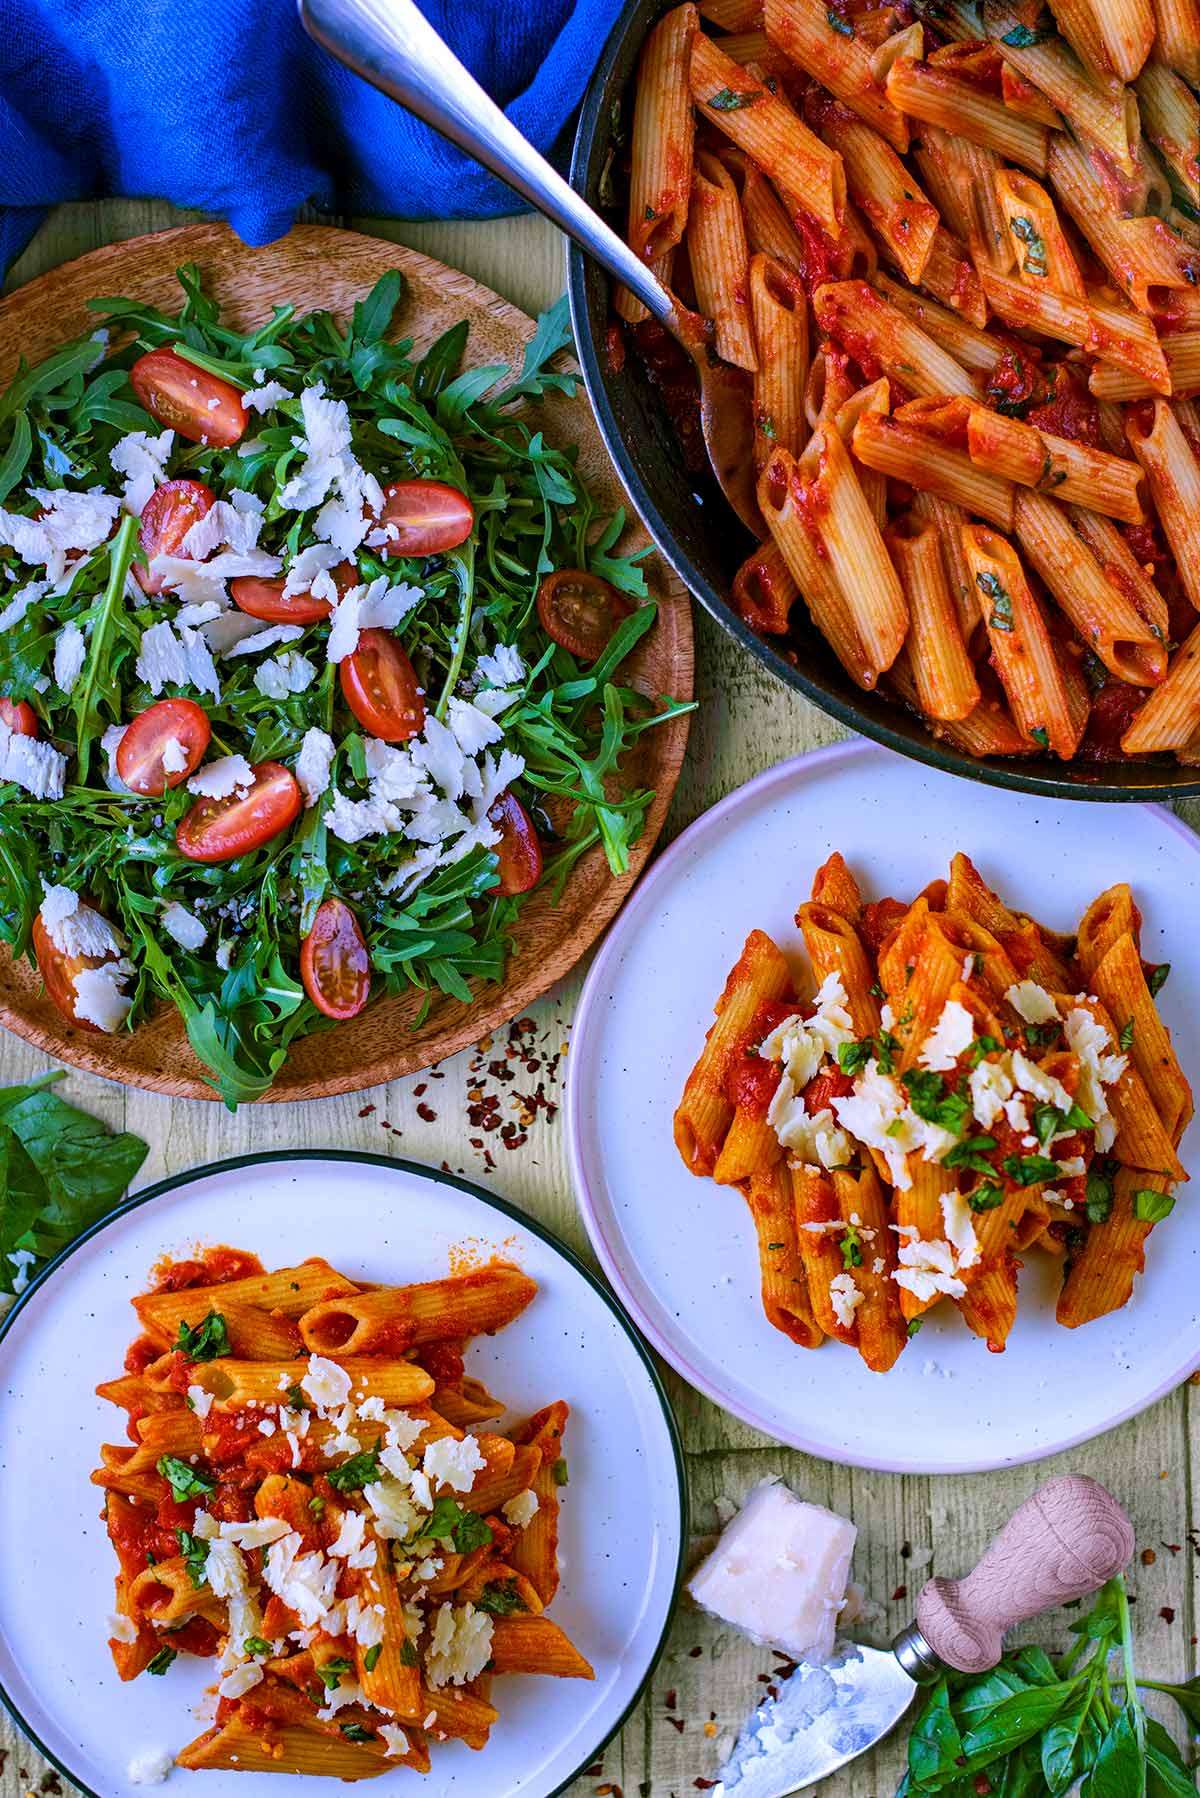 Two plates of penne arrabbiata next to a pan of more pasta and a plate of salad.